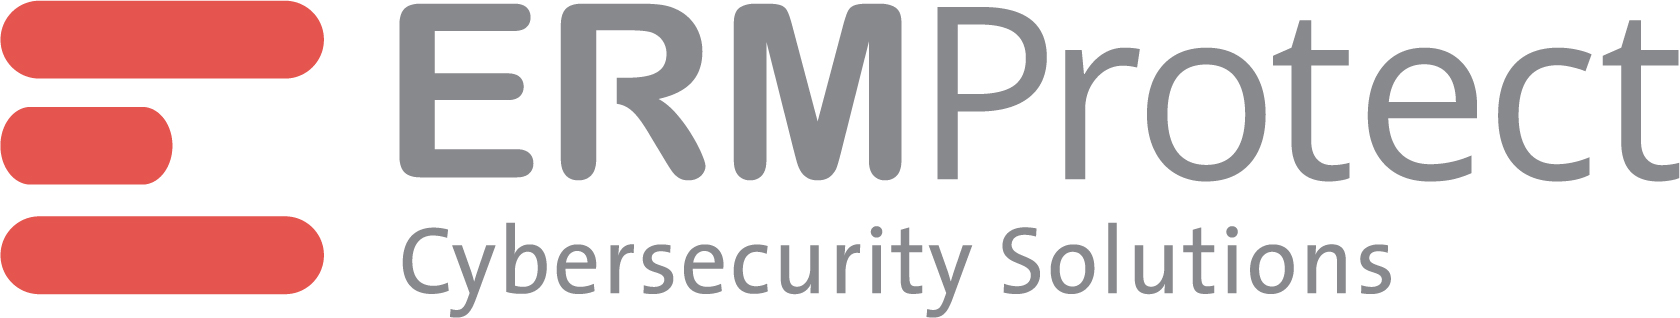 ERMProtect Cybersecurity Solutions